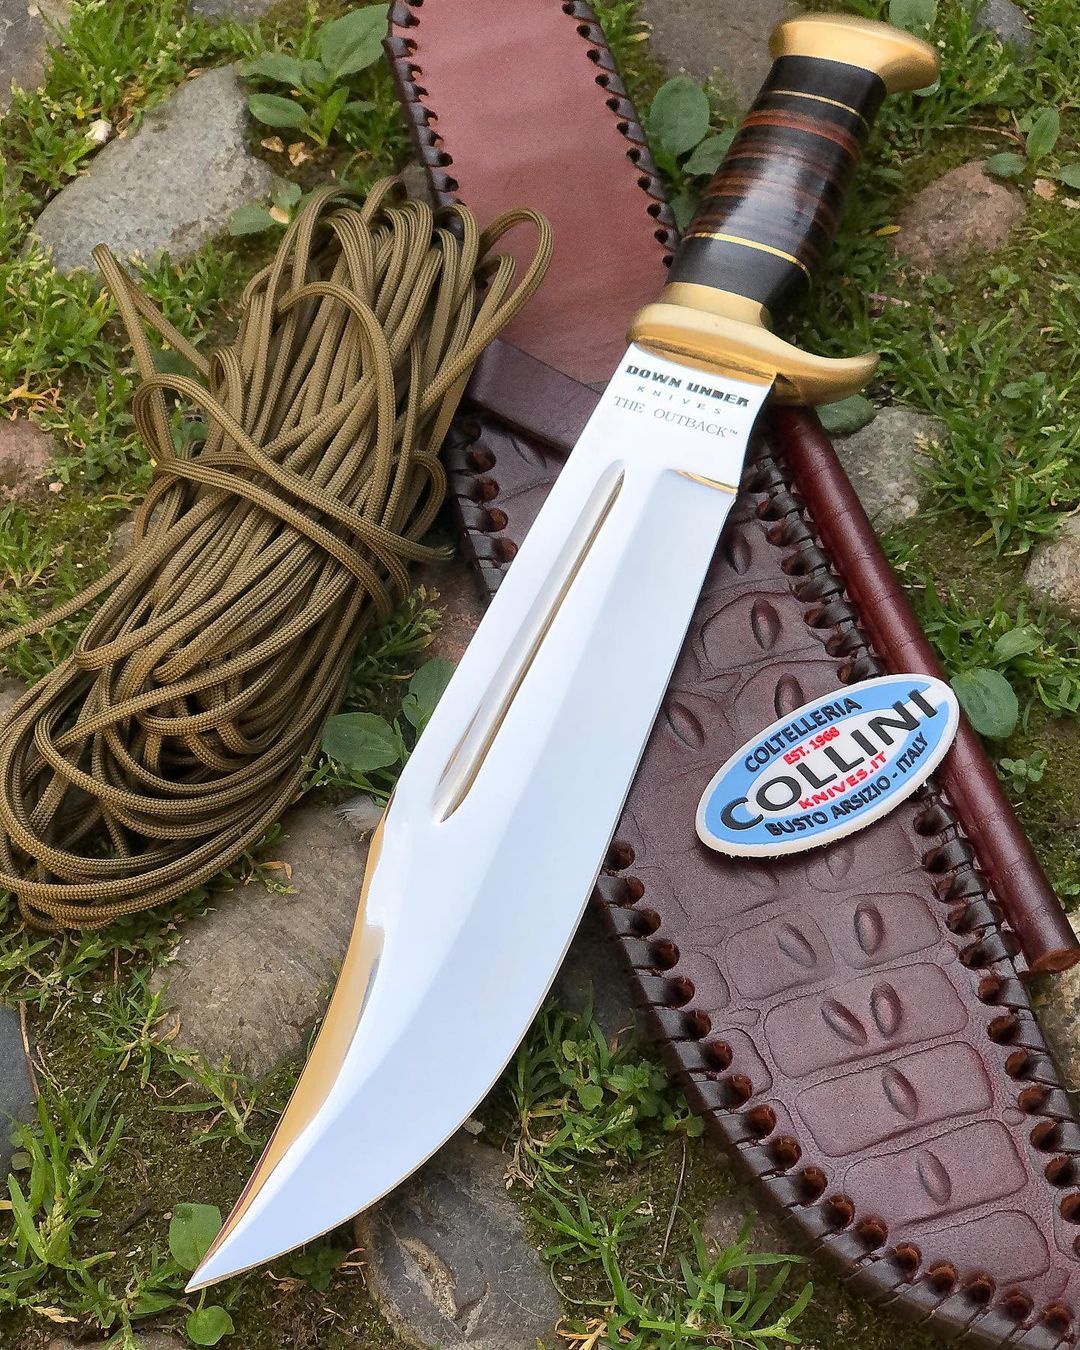 Coltelleria Collini - Big Brother Survival knife 😎 Follow us  👉@coltelleriacollini👈 Order: knives.it -------------------------------  #hunting #hunter #knivesdaily #blades #kabar #intothewild #intothewoods  #hunting #hunt #bushcrafting #knifelife